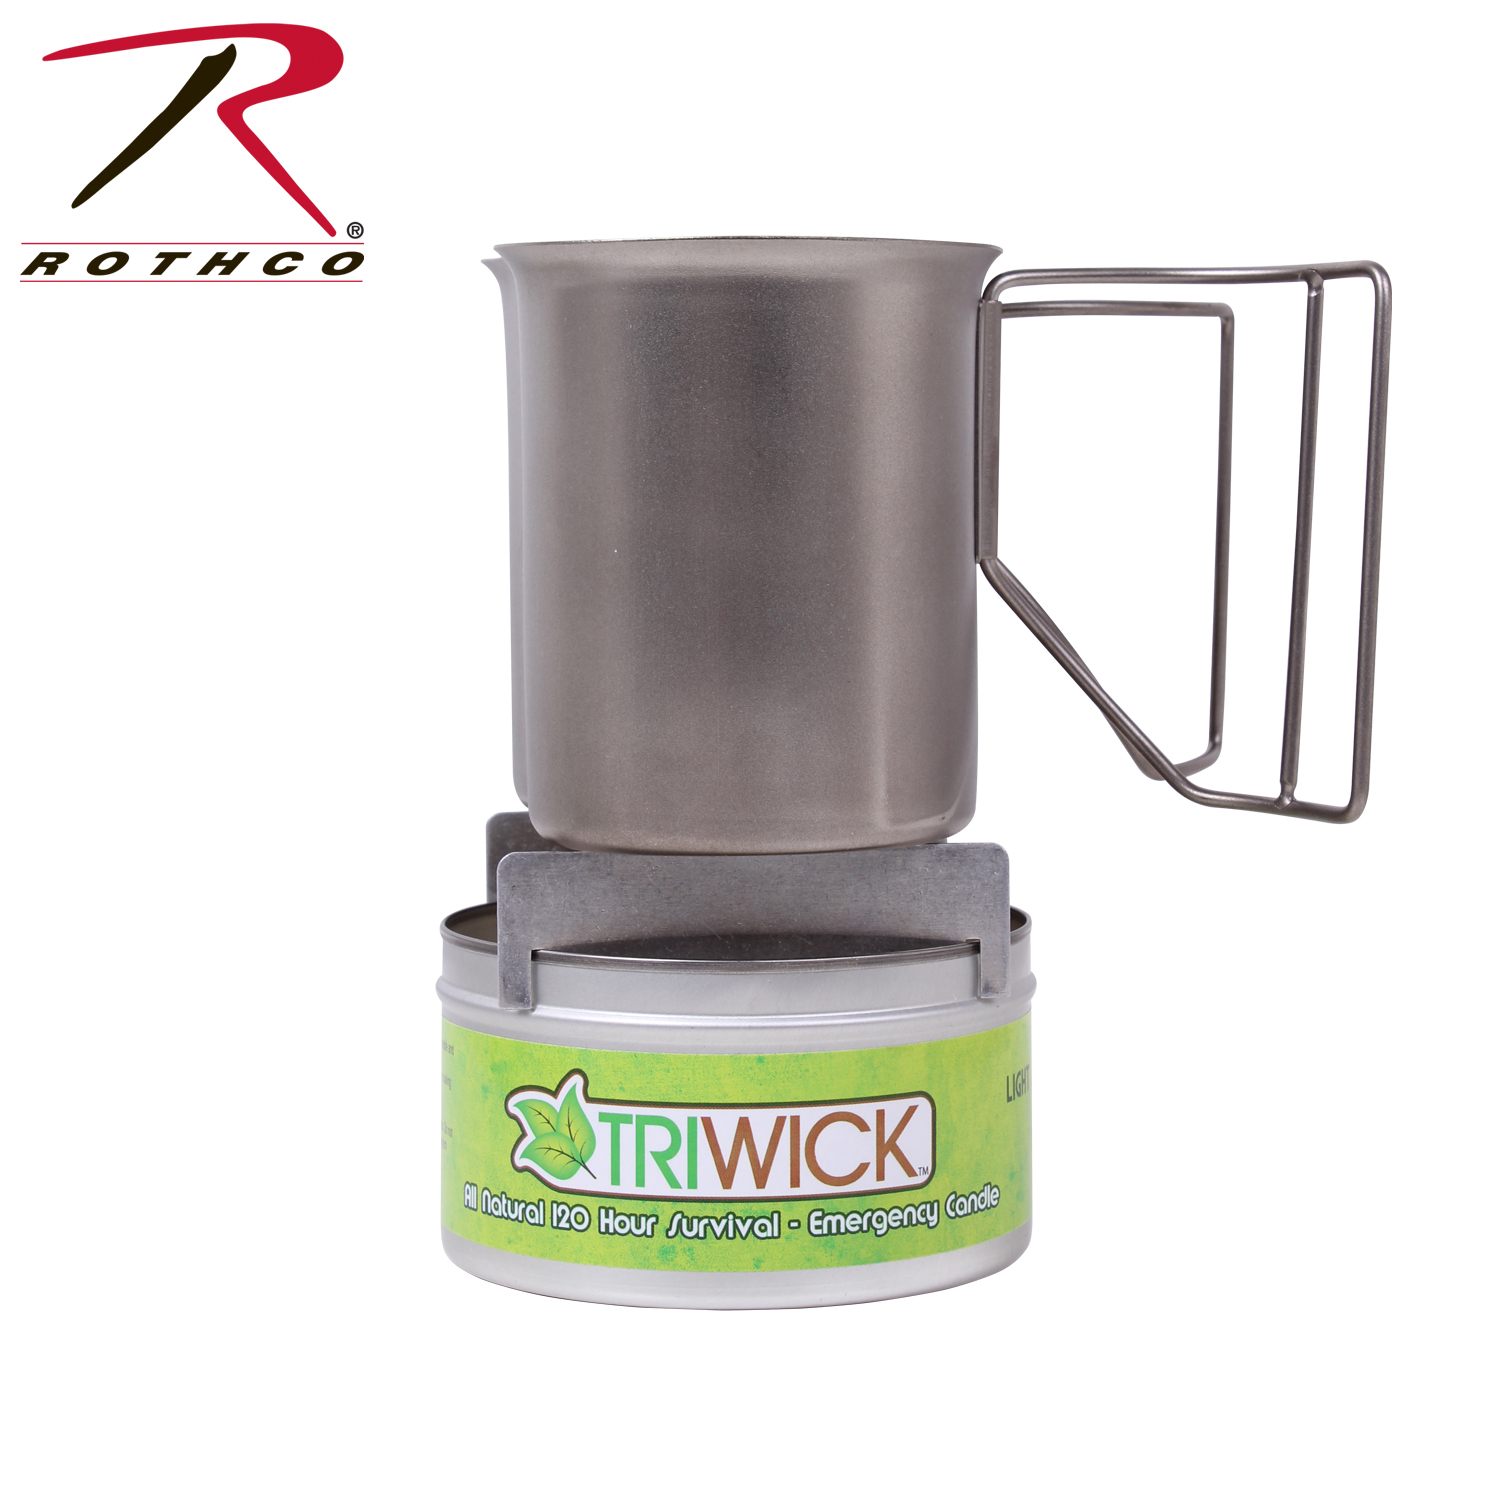 Triwick 120 Hour Survival Candle & Camping Stove